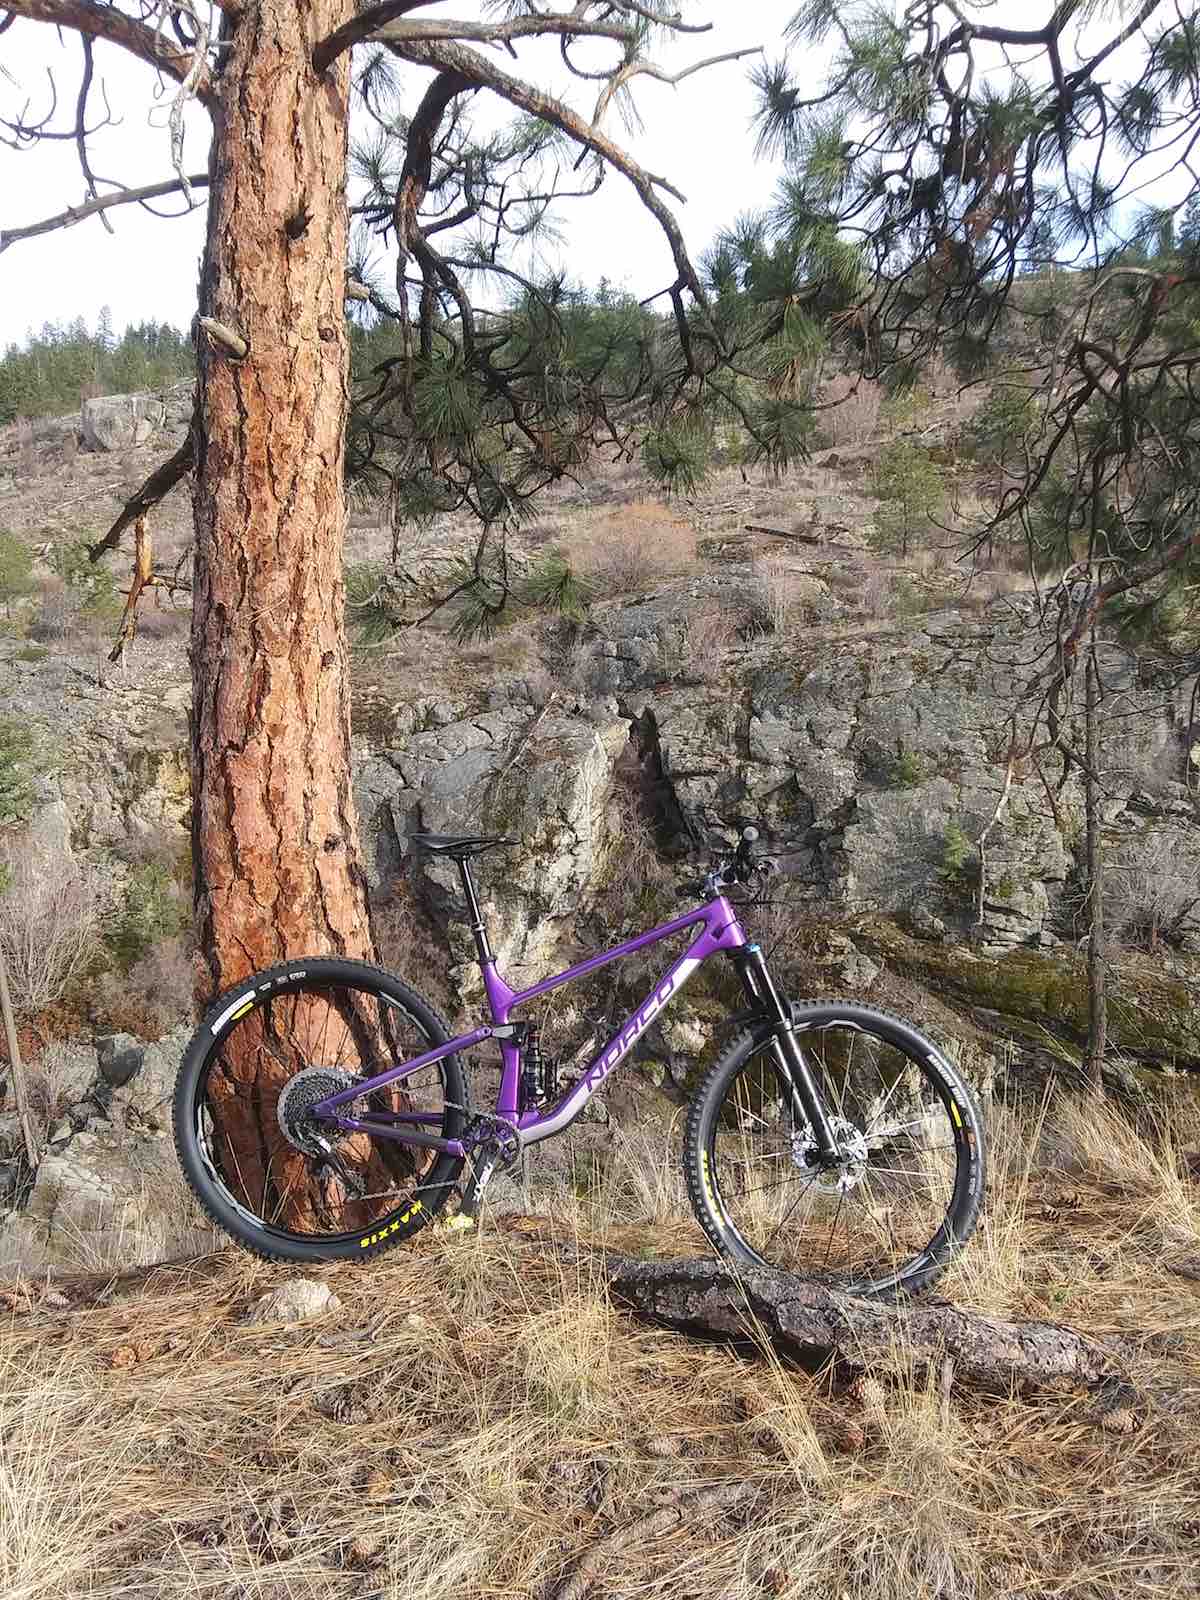 bikerumor pic of the day purple norco bicycle leaning against pine tree with scrub in the background in Penticton, BC, Canada.